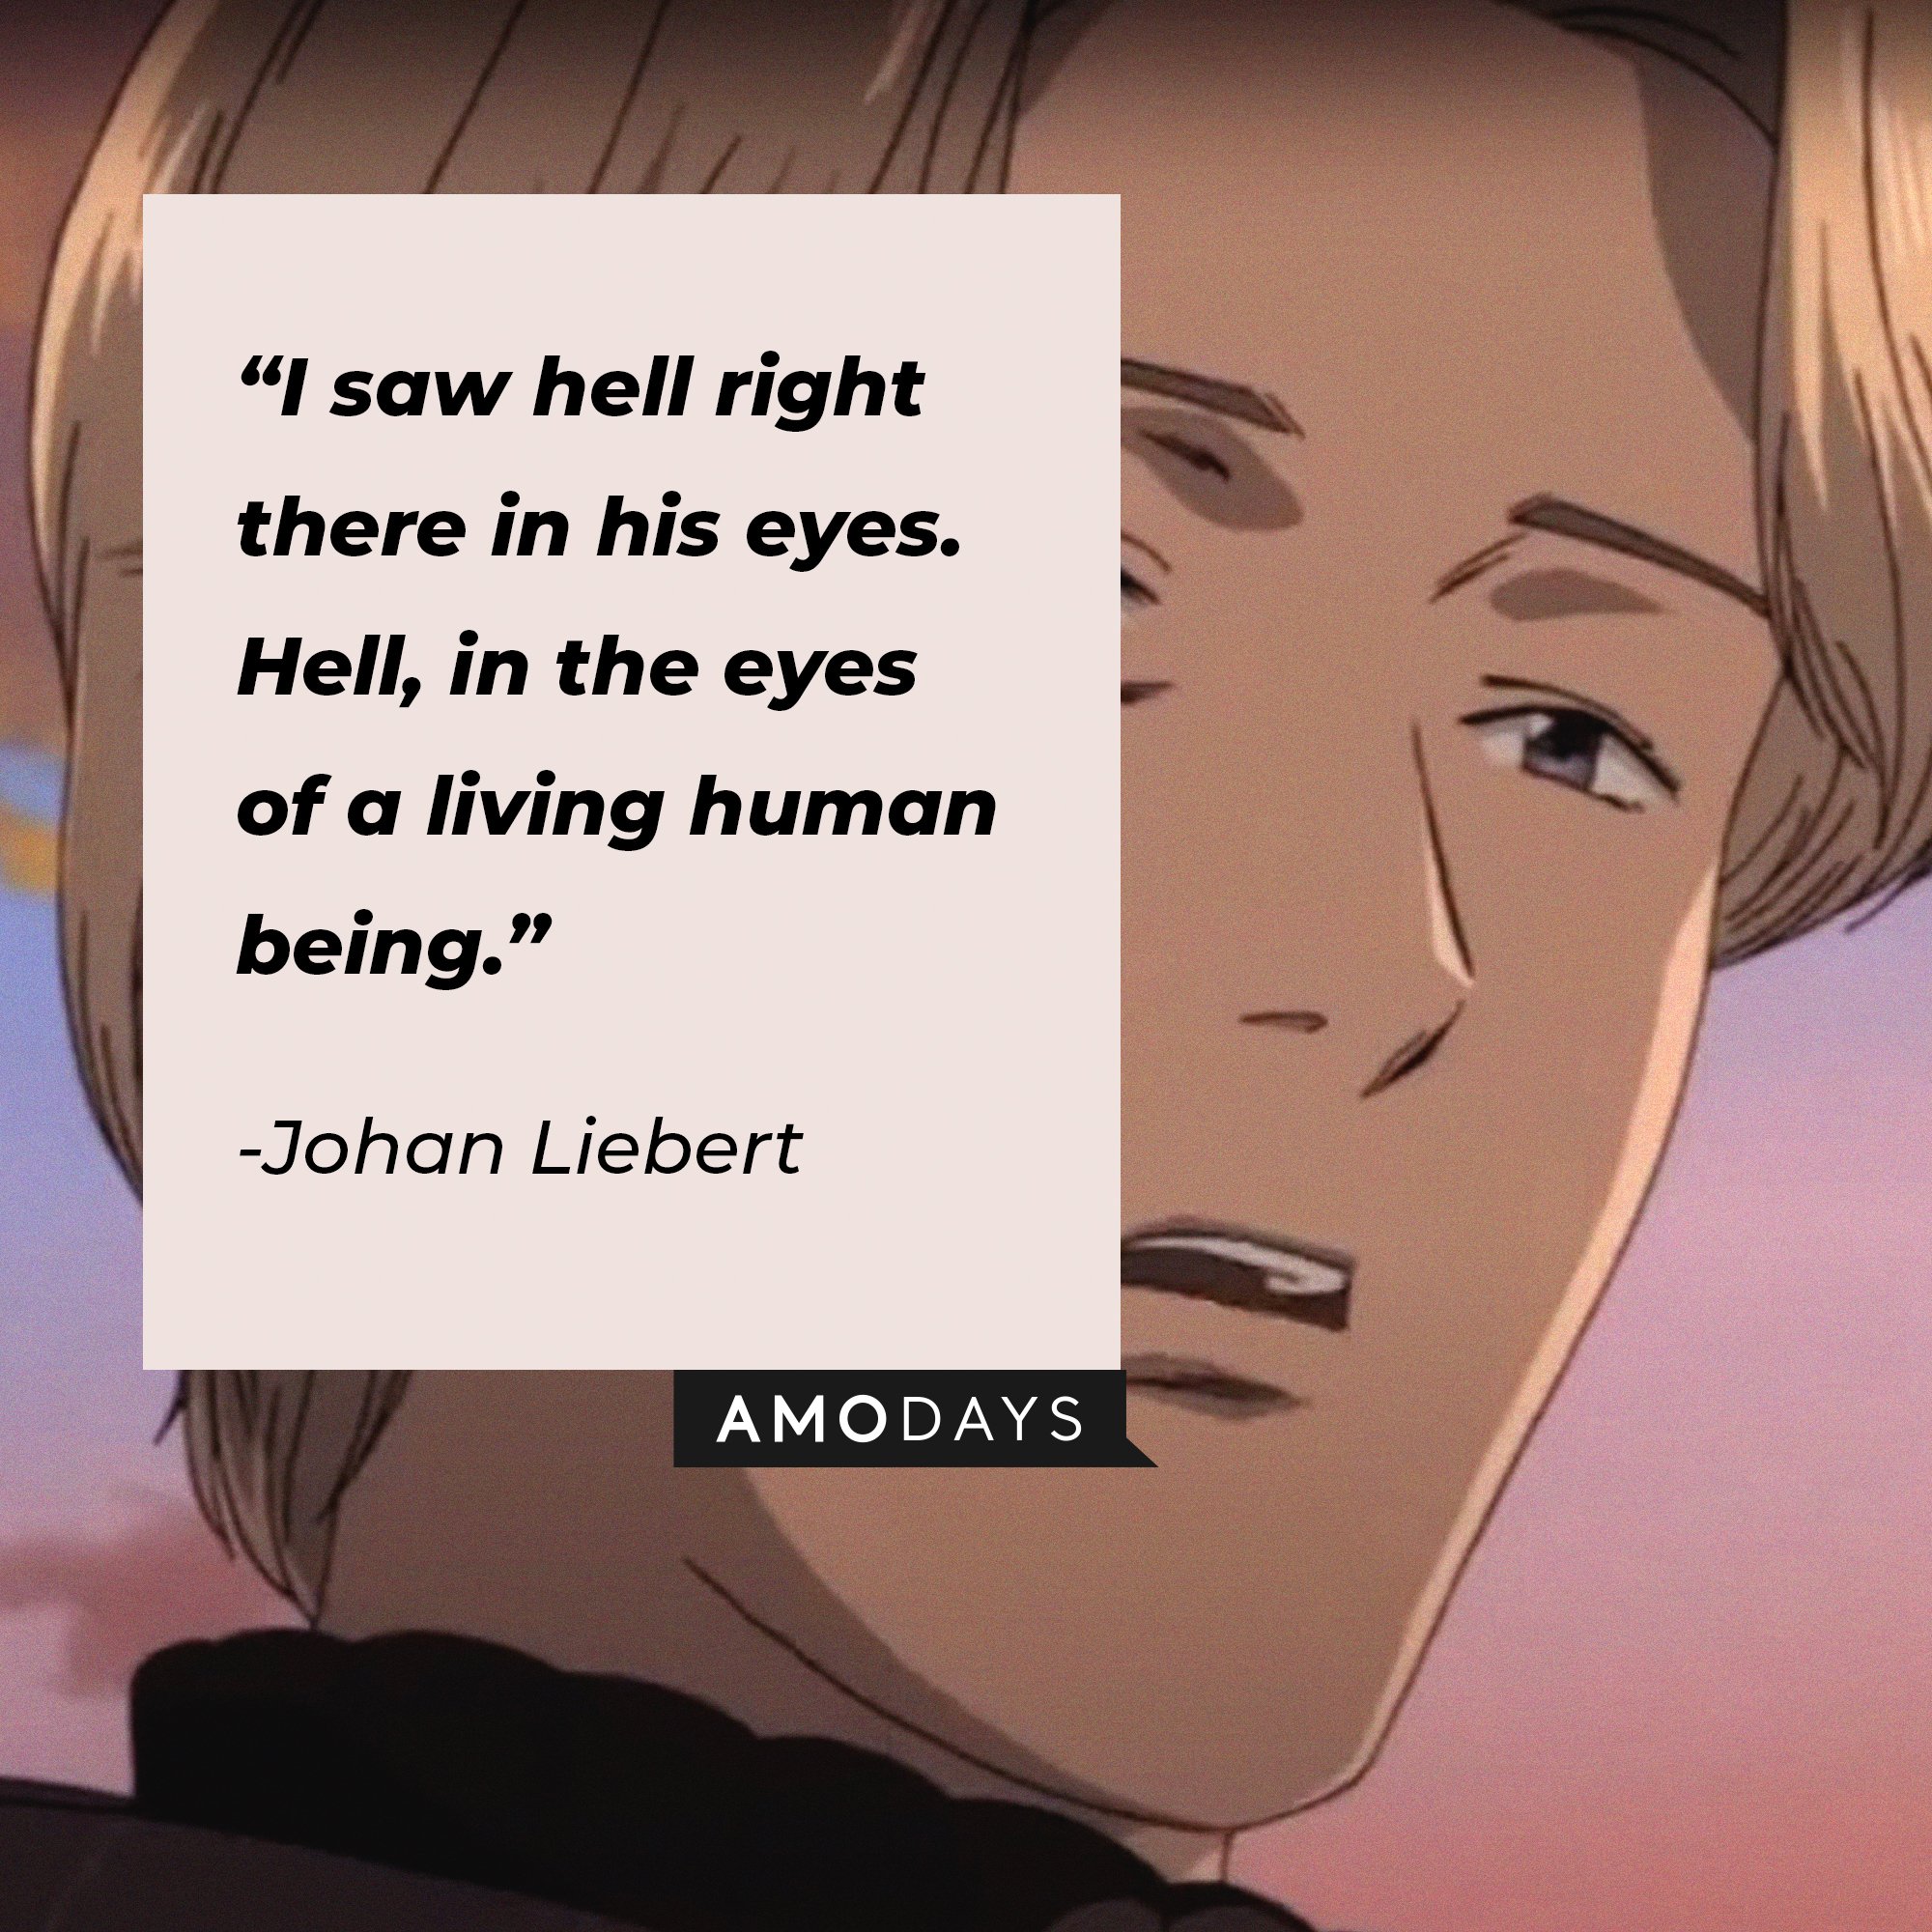 Johan Liebert’s quote: “I saw hell right there in his eyes. Hell, in the eyes of a living human being.” | Image: AmoDays